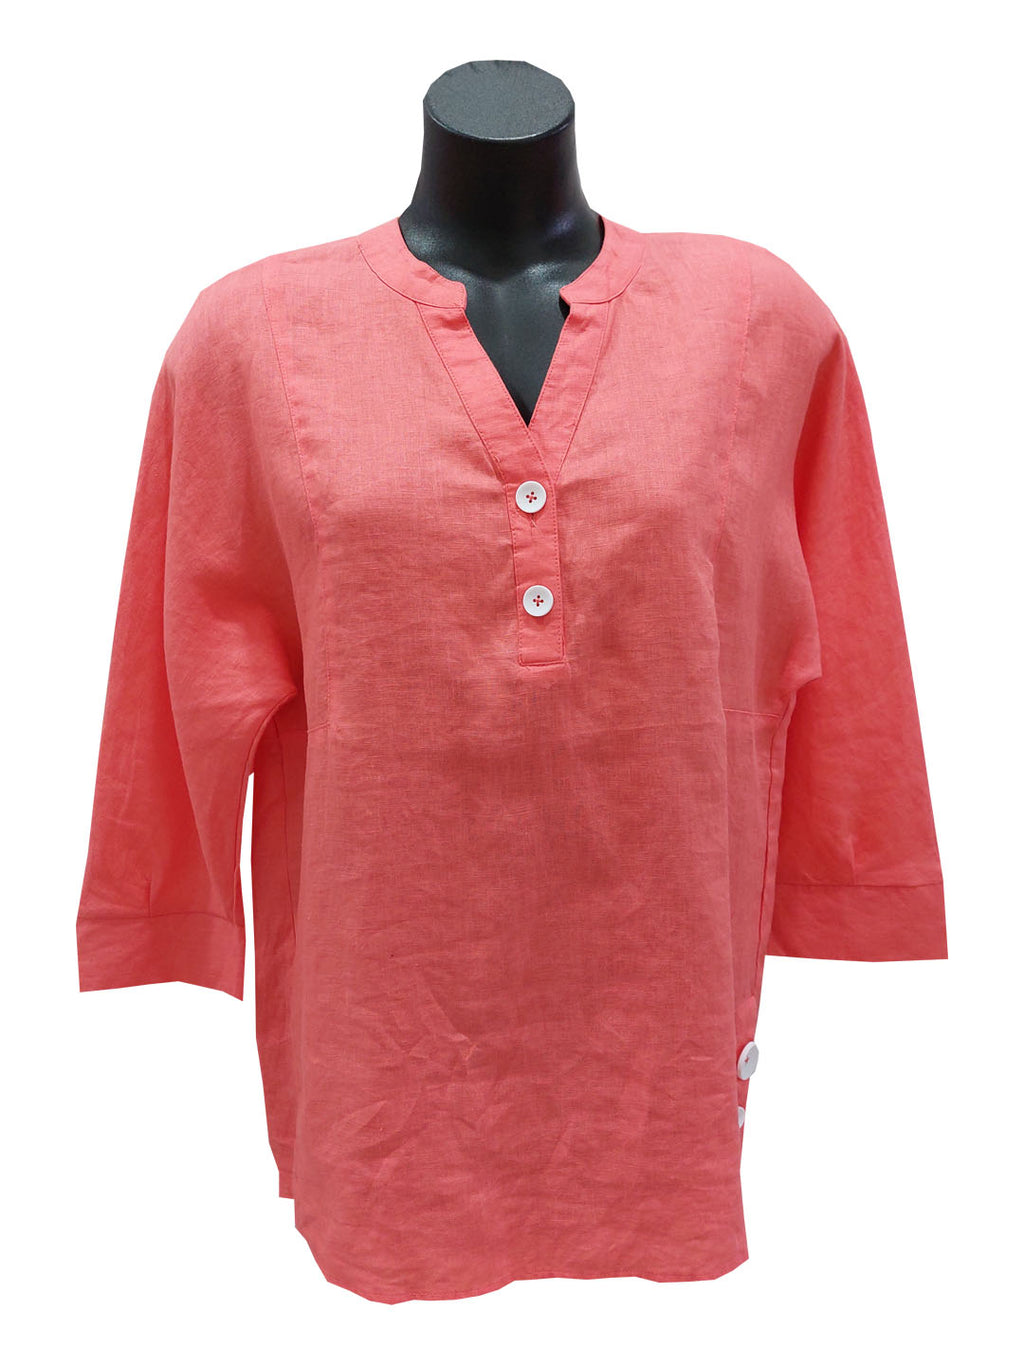 SEE SAW ROUND V NECK TOP